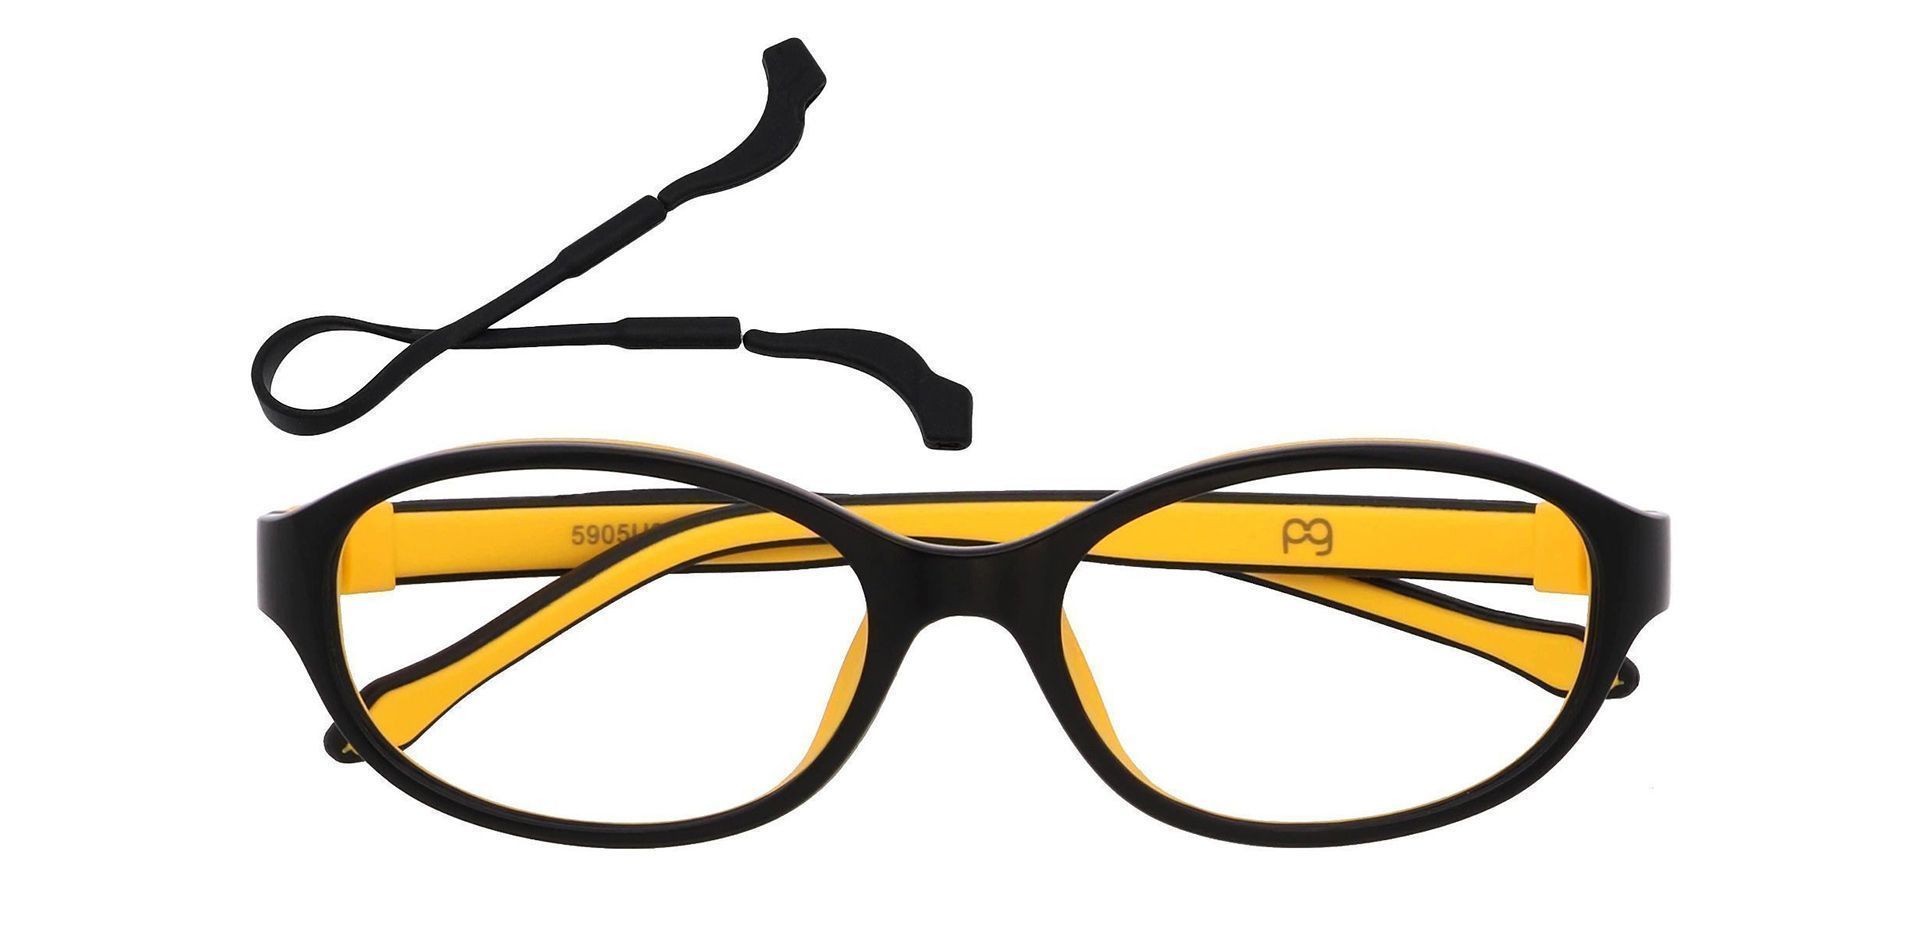 Stone Oval Blue Light Blocking Glasses - The Frame Is Black And Yellow